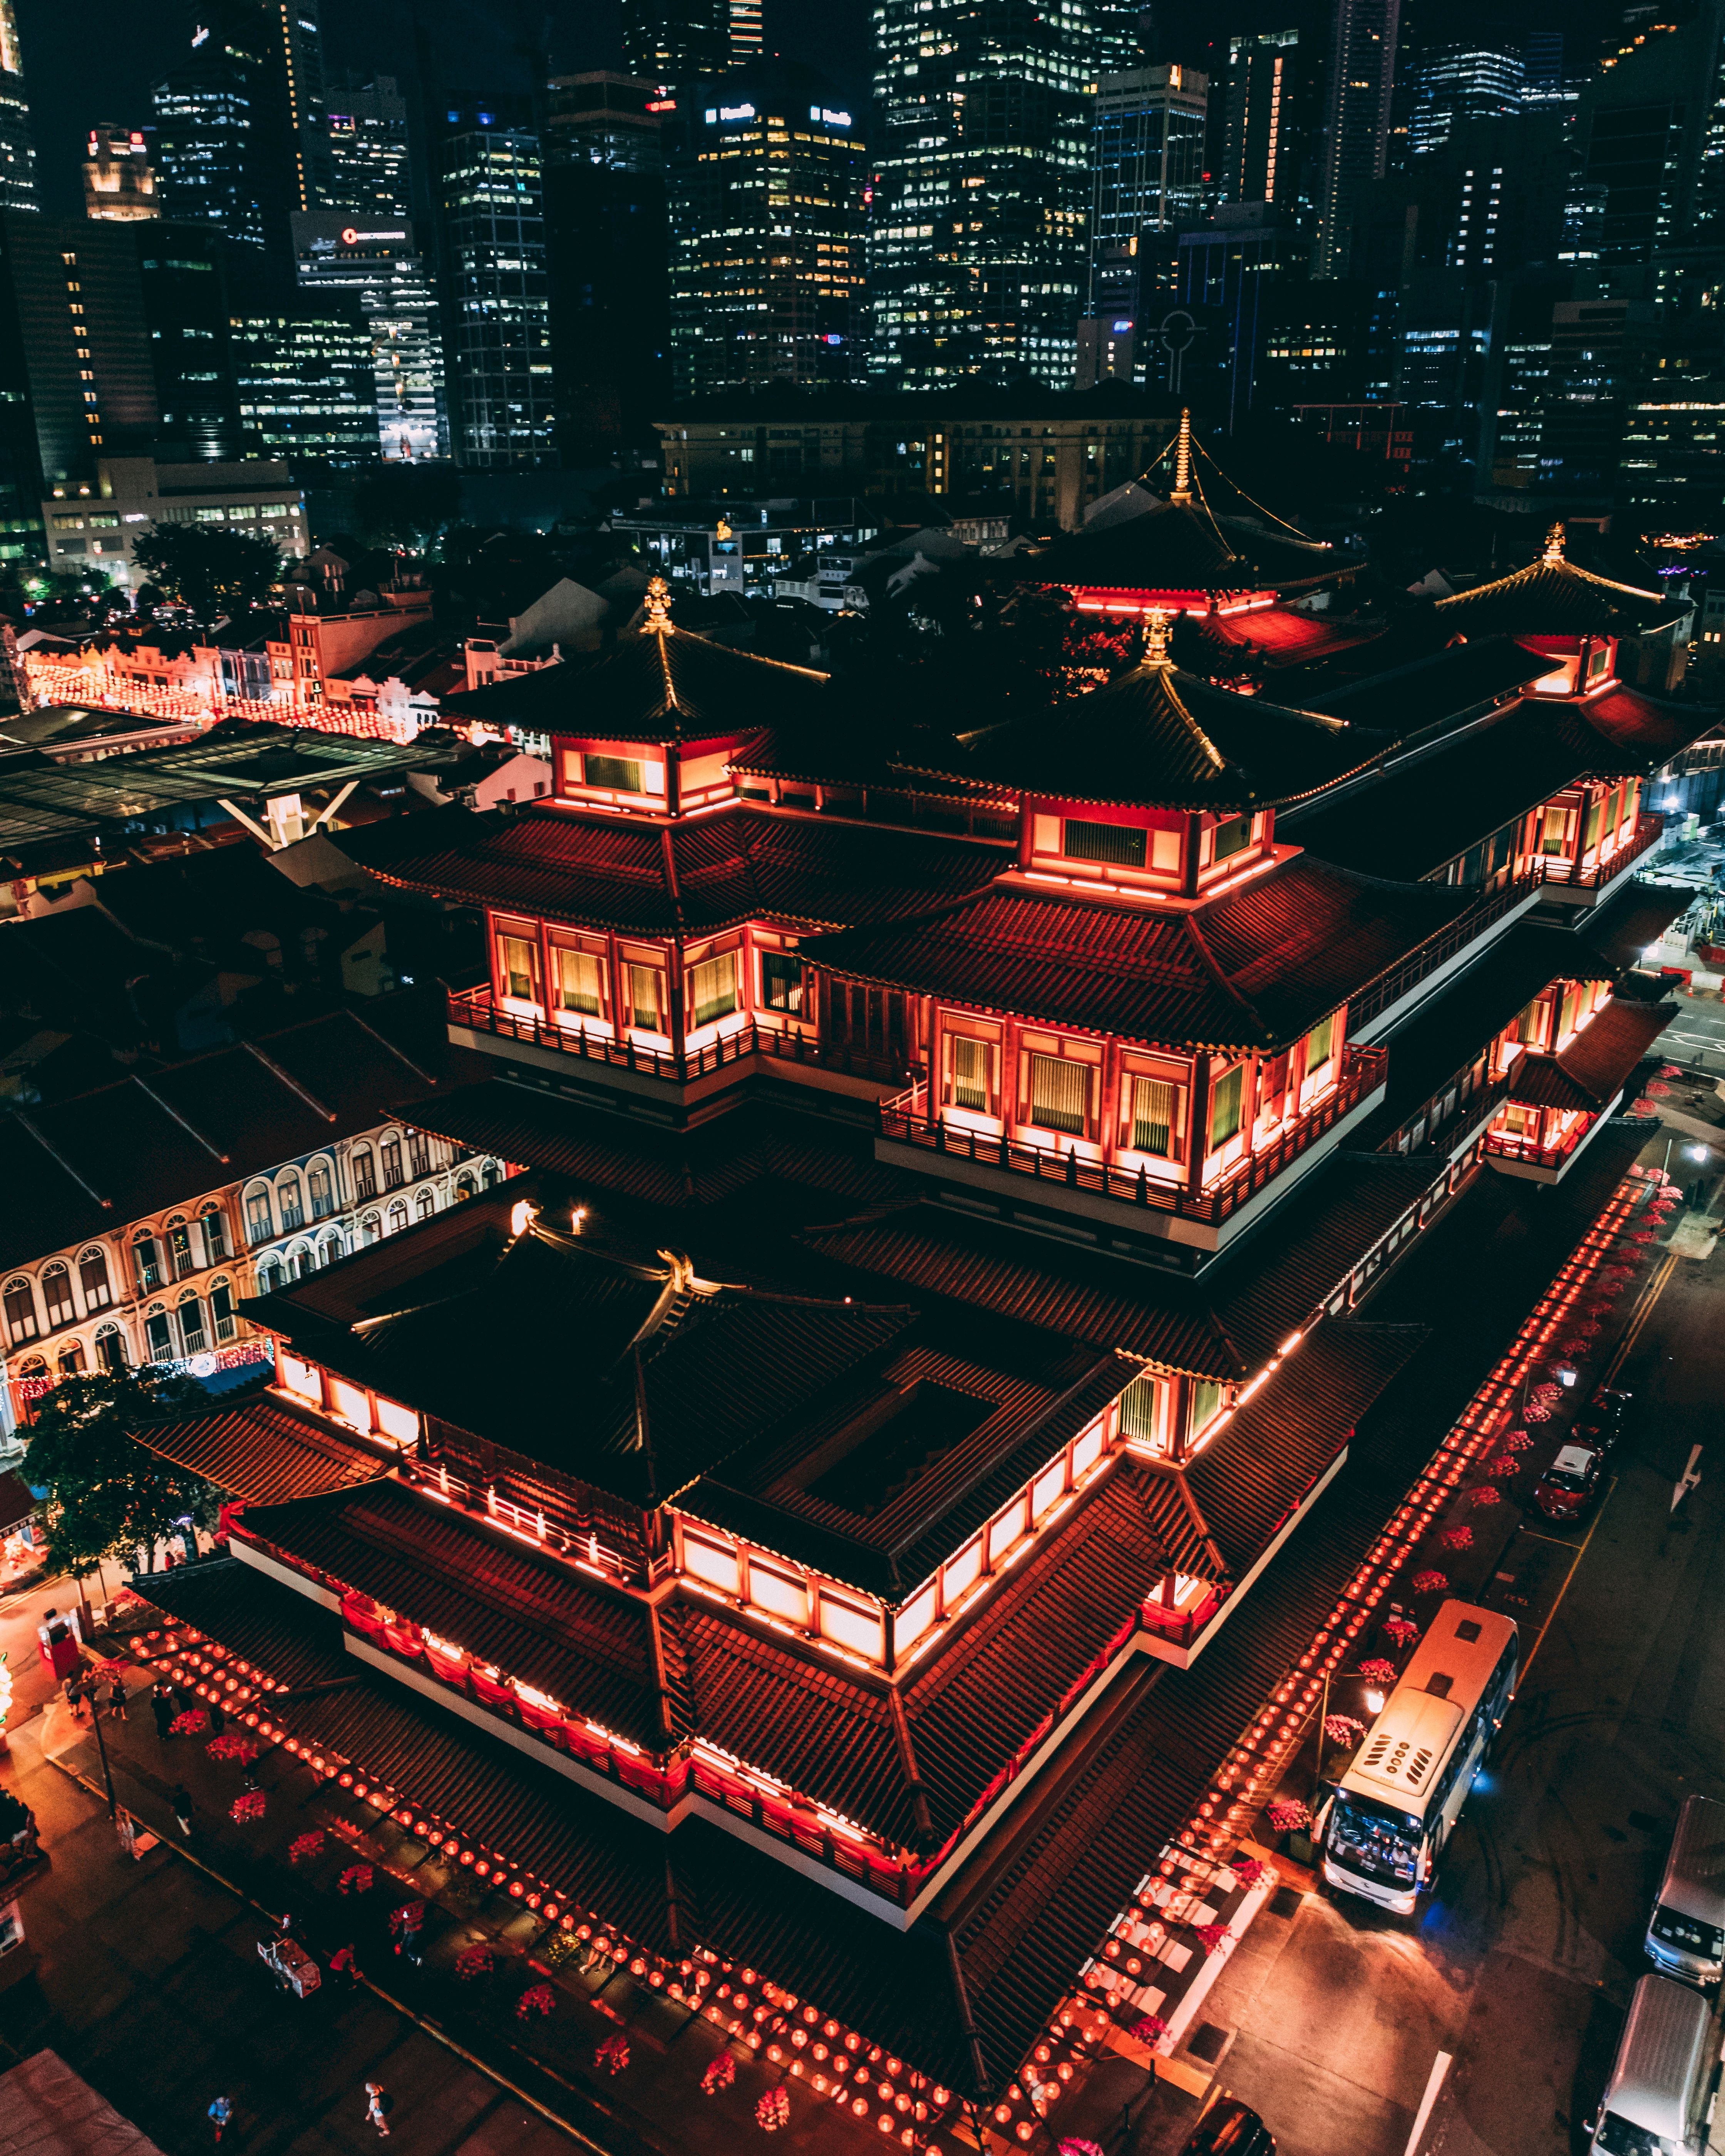 pagoda, cities, architecture, view from above, night city, roof, china, roofs download HD wallpaper